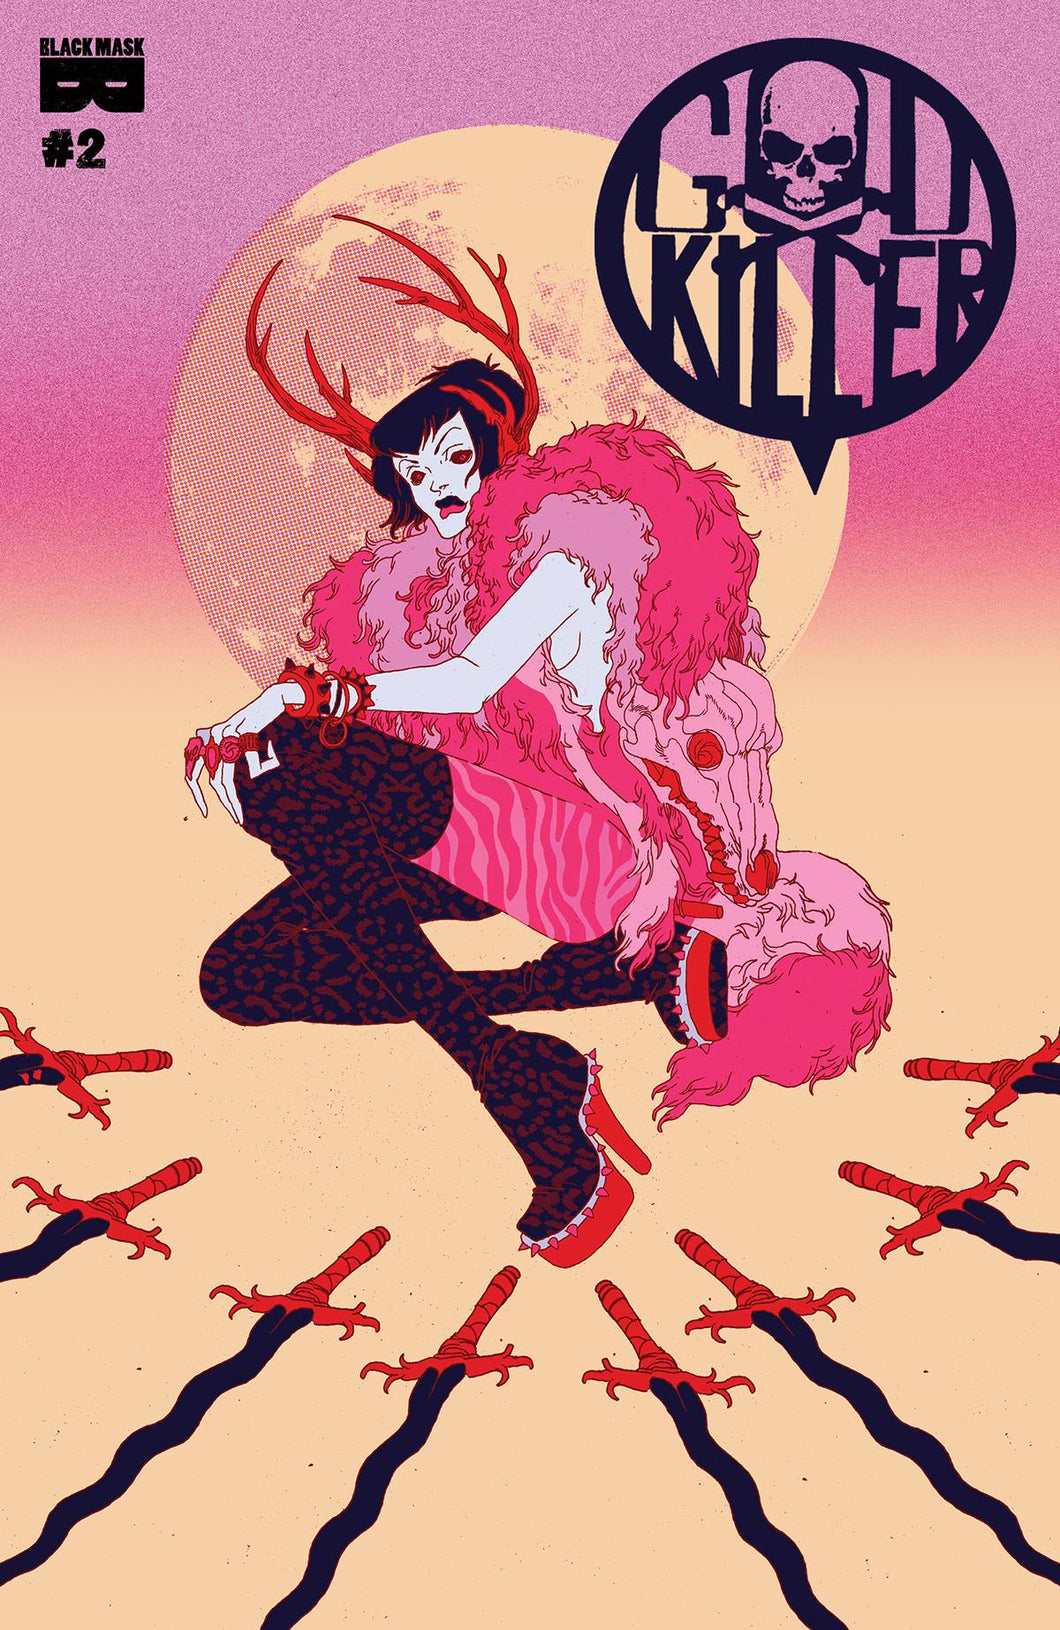 Godkiller Tomorrows Ashes #2 (Cover A - Wieszczyk)